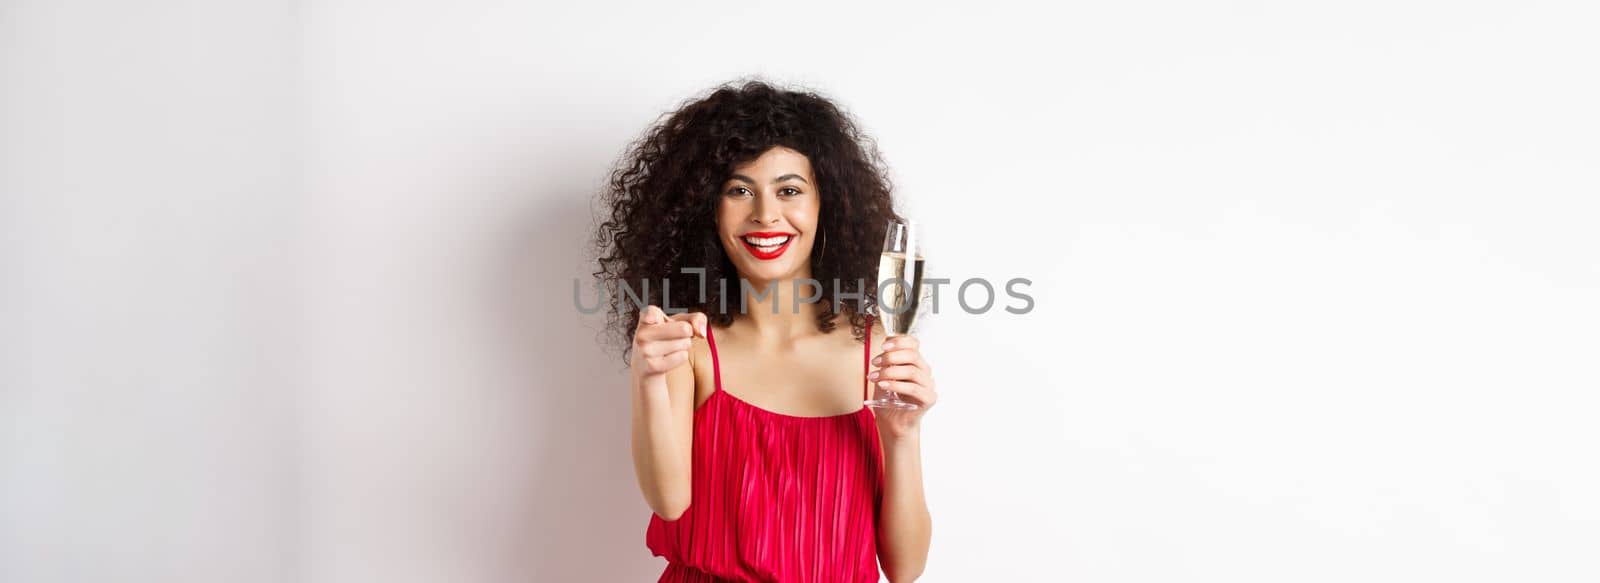 Beautiful curly woman in red dress, partying or having romantic date, holding glass of champagne and pointing at you, inviting person, standing on white background.